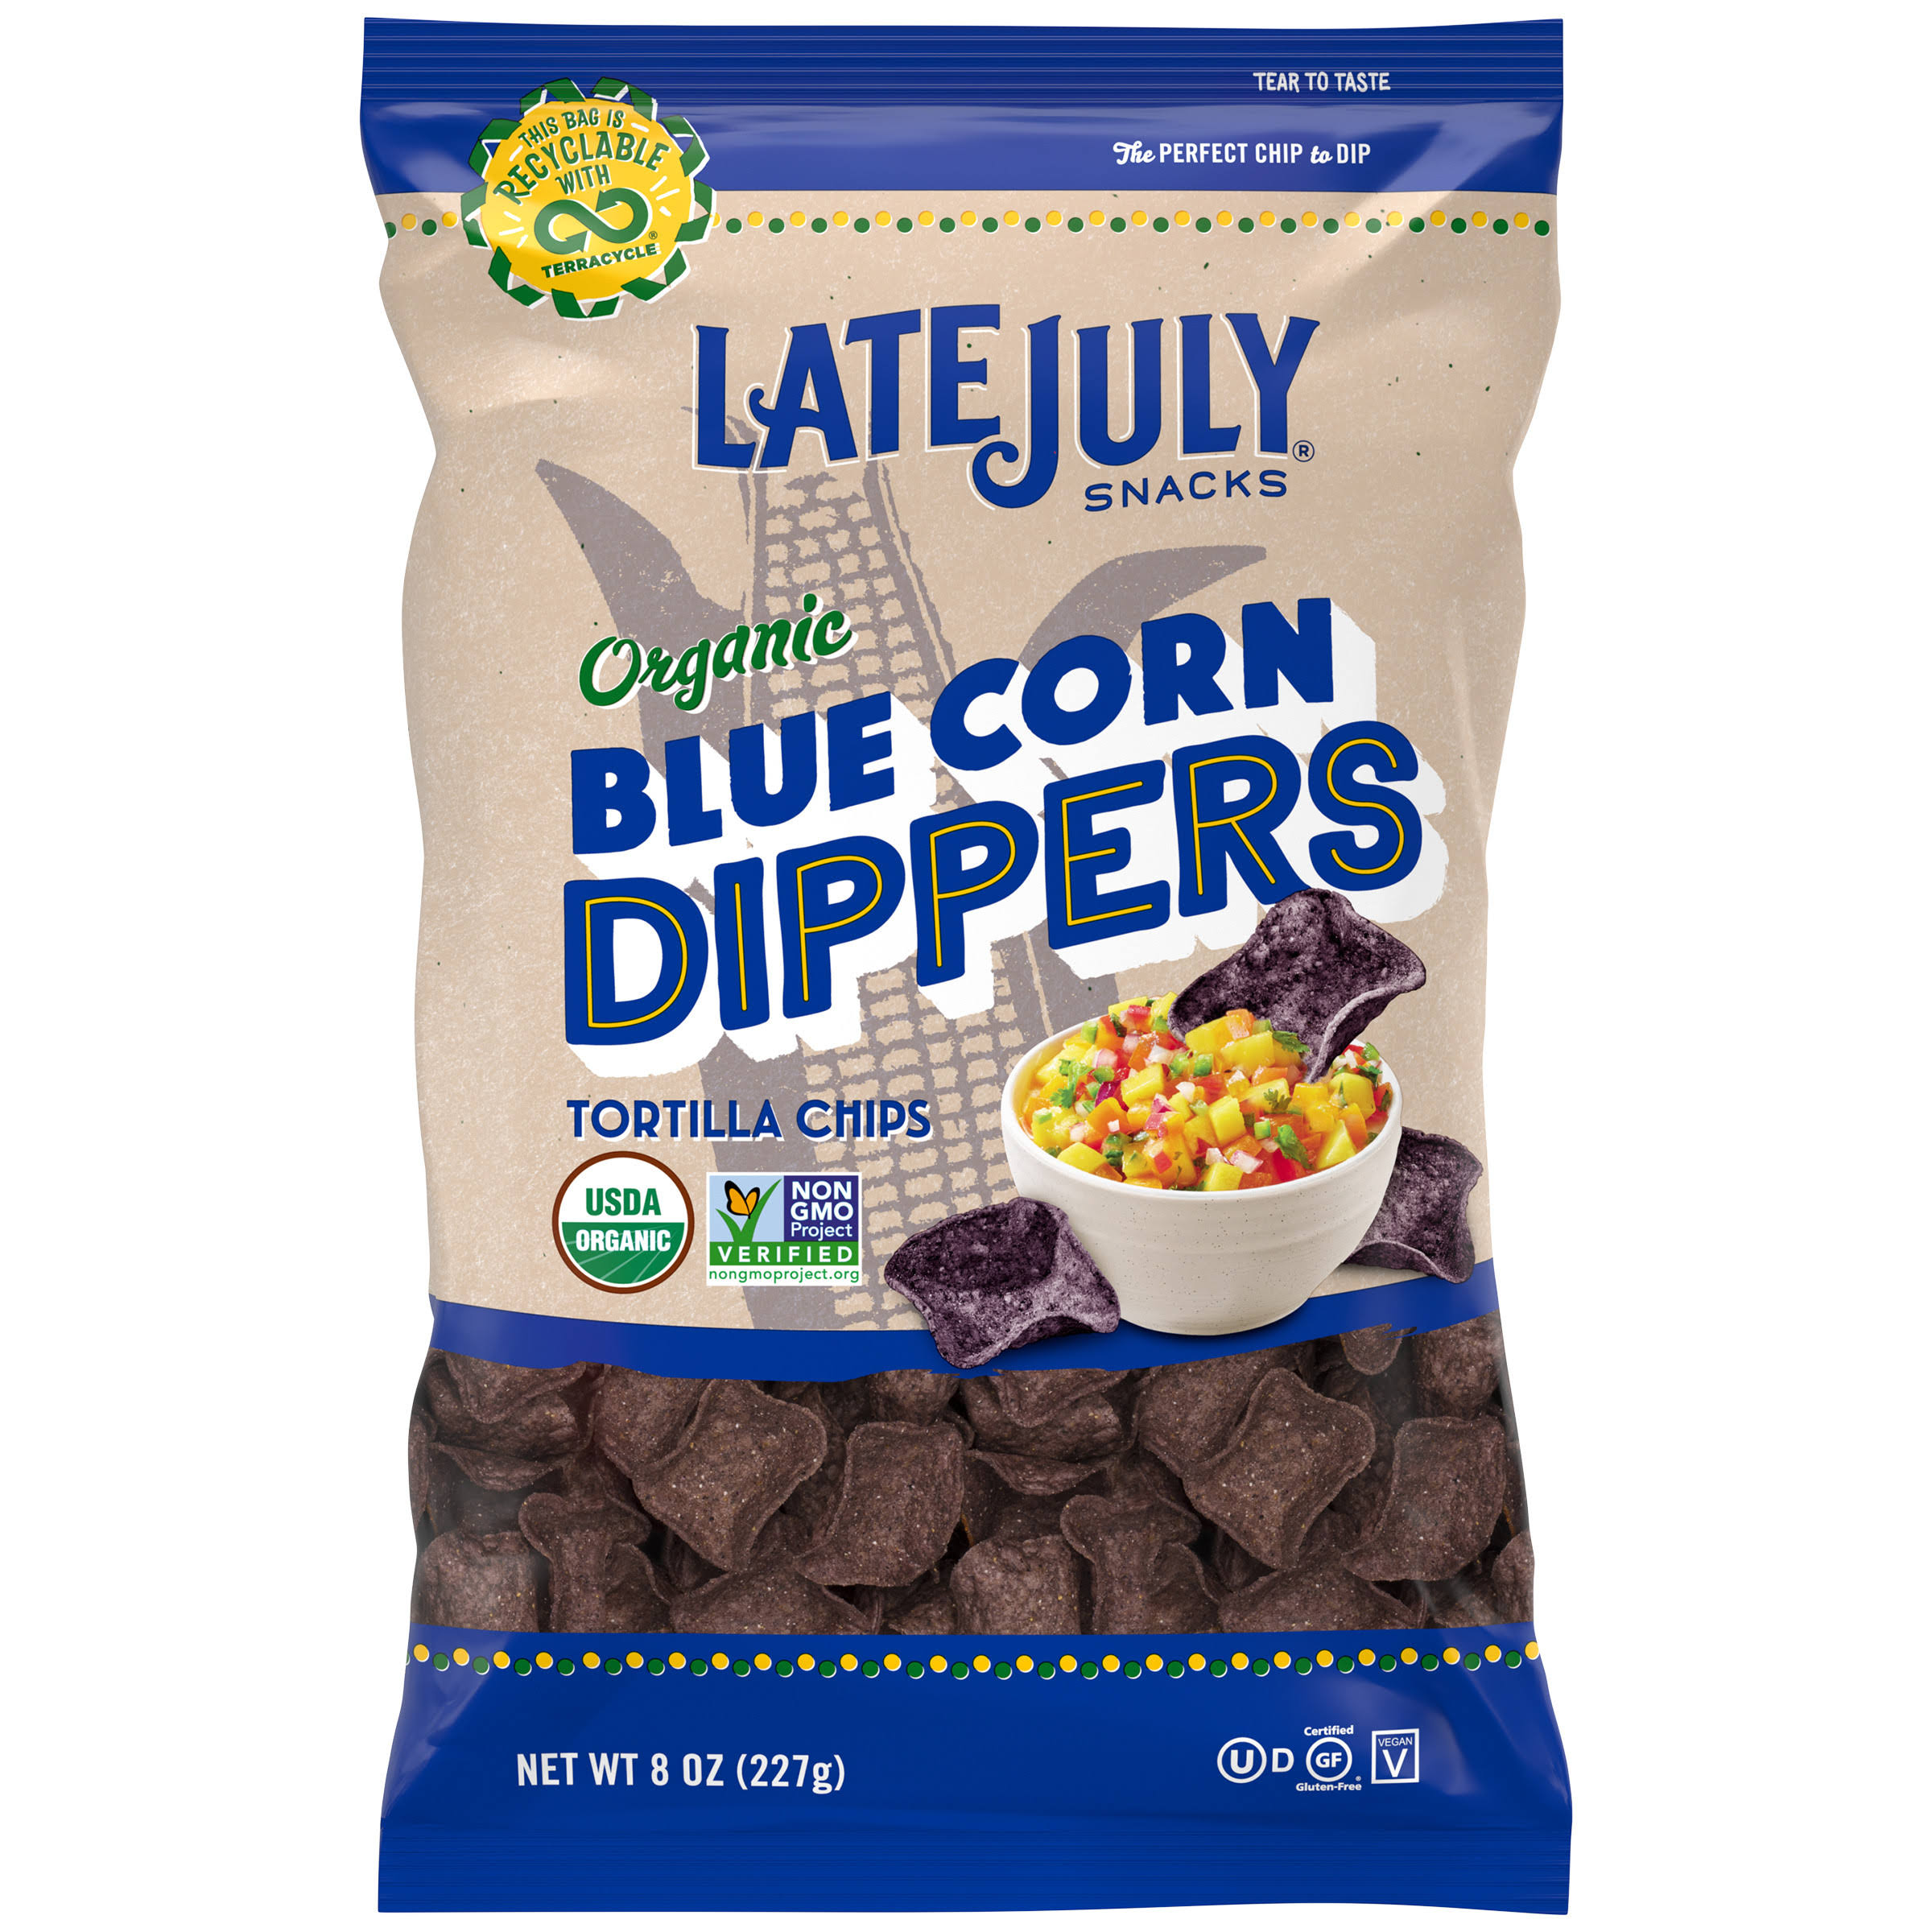 Late July Snacks Cantina Dippers Tortilla Chips - Blue Corn, 8oz